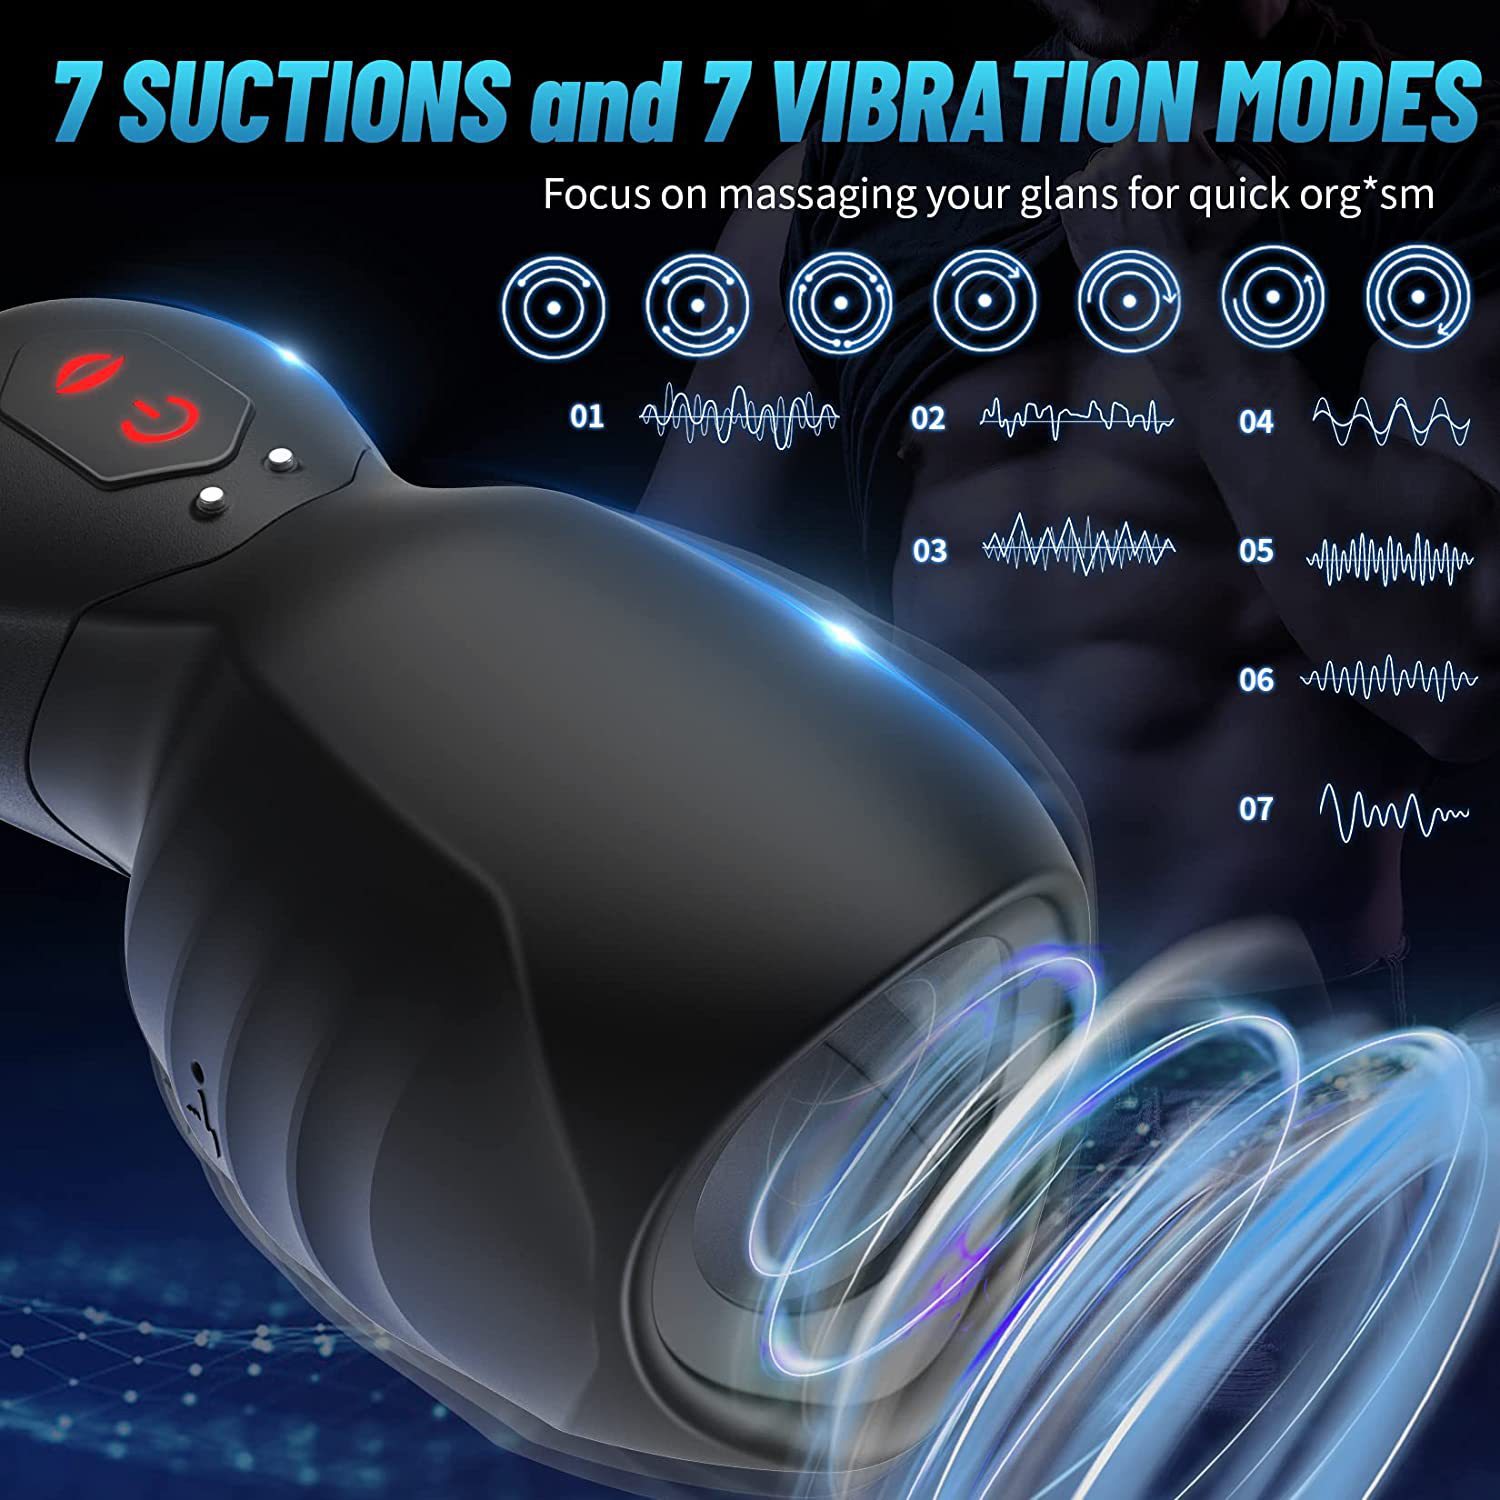 A13--Male aircraft cup sucking vibrating male masturbation device